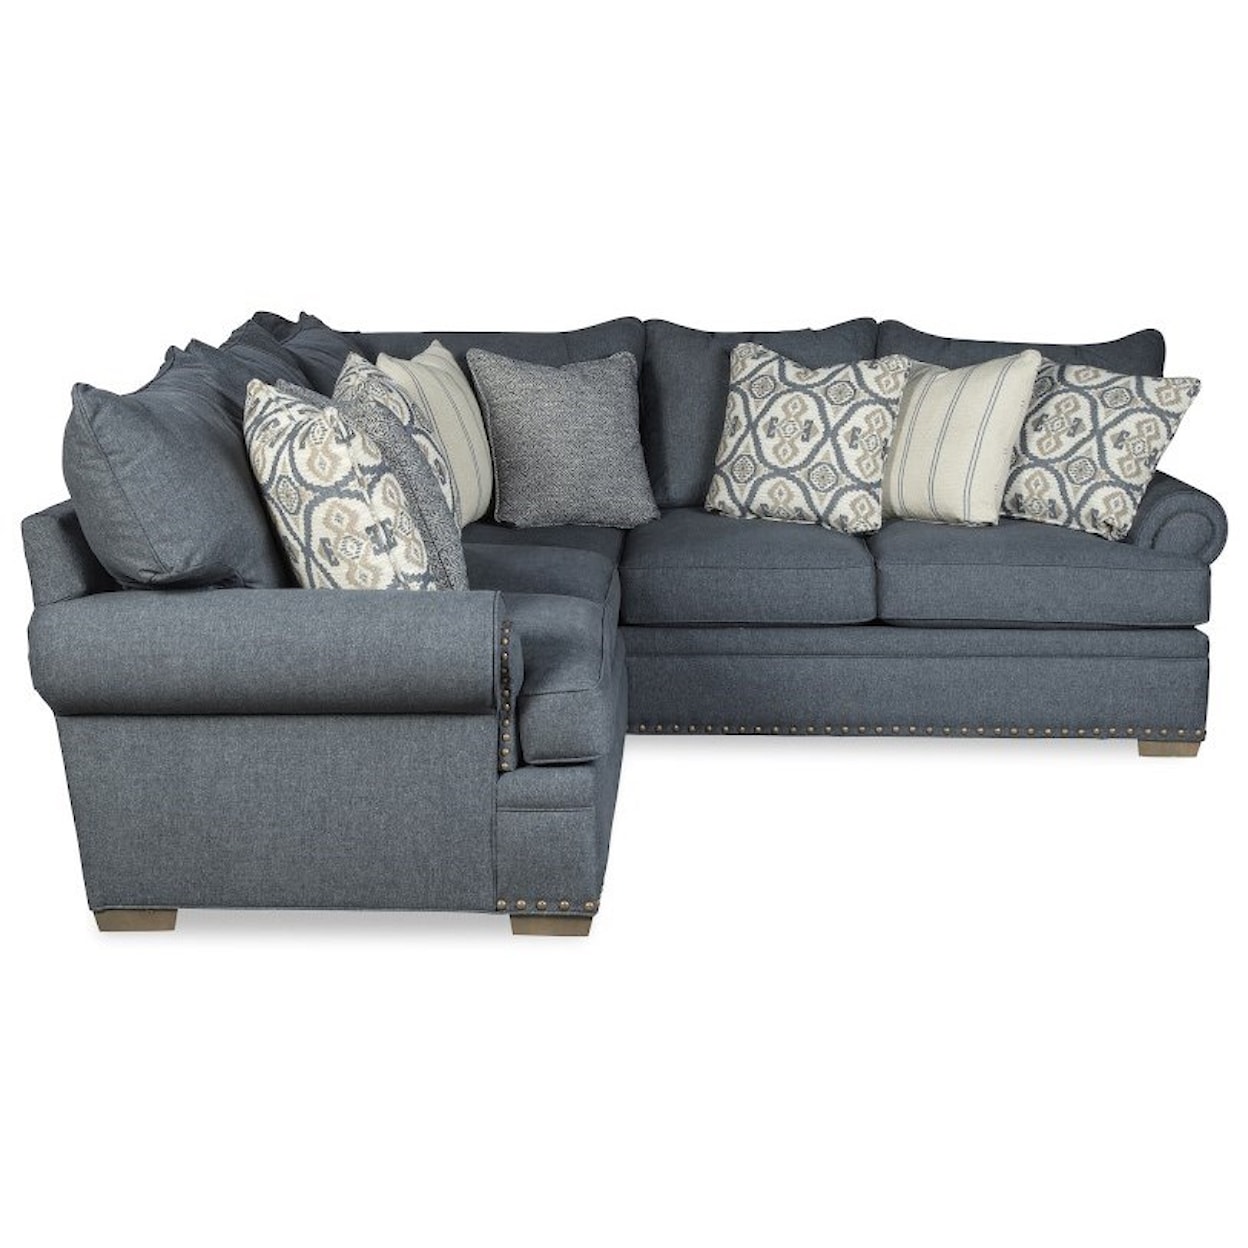 Hickory Craft 701650 4-Seat Sectional Sofa w/ LAF Loveseat